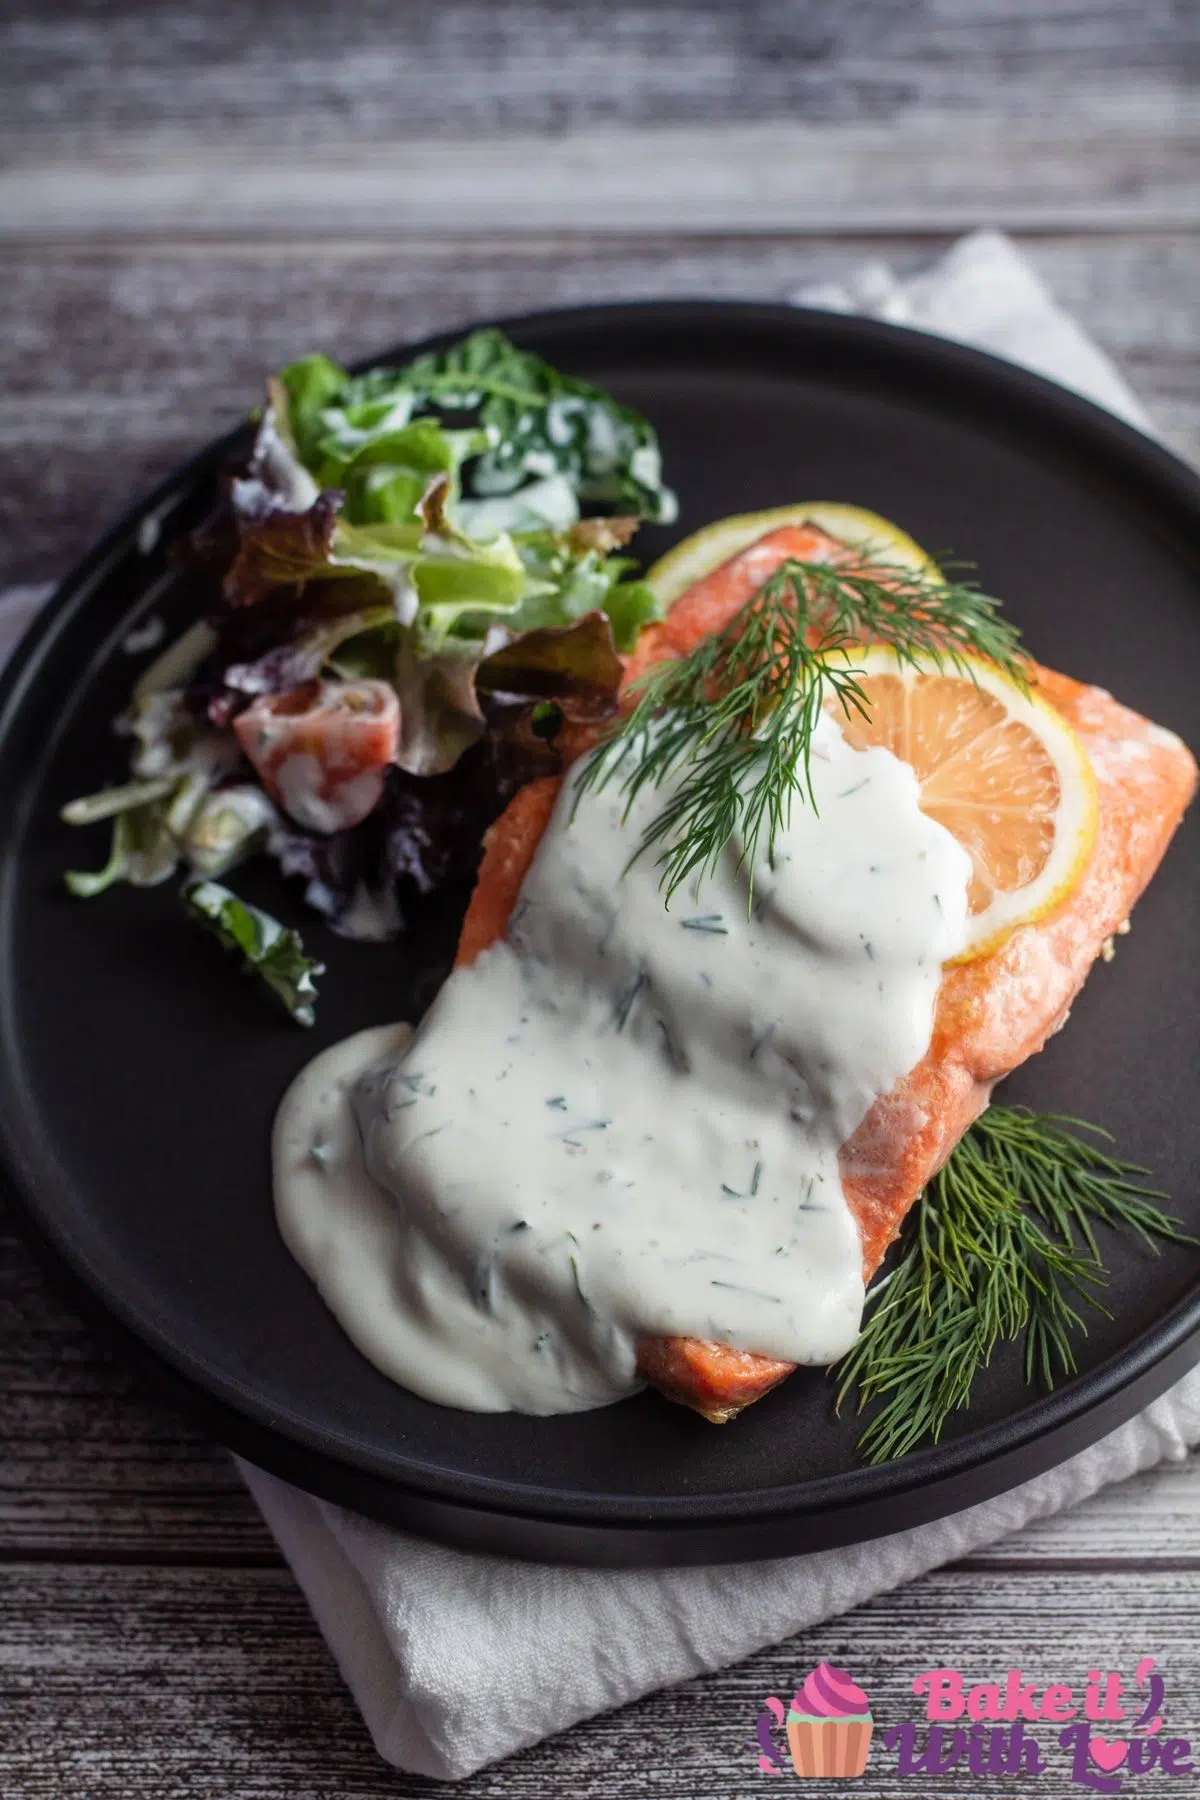 Tall image of salmon with dillsauce on a black plate with lemon slice.